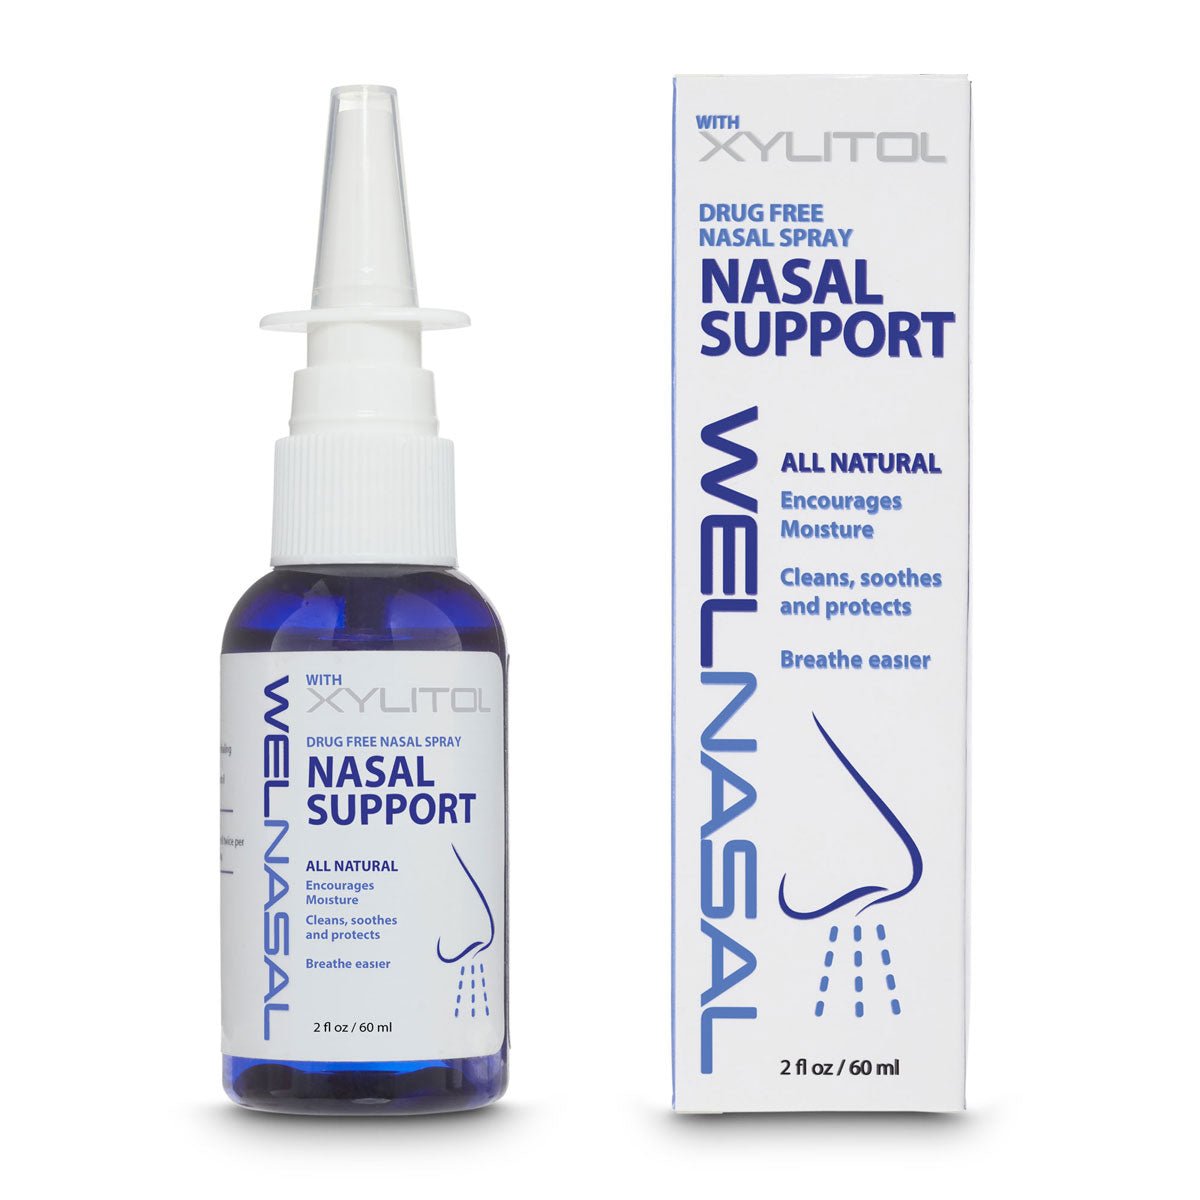 xylitol products including nasal spray